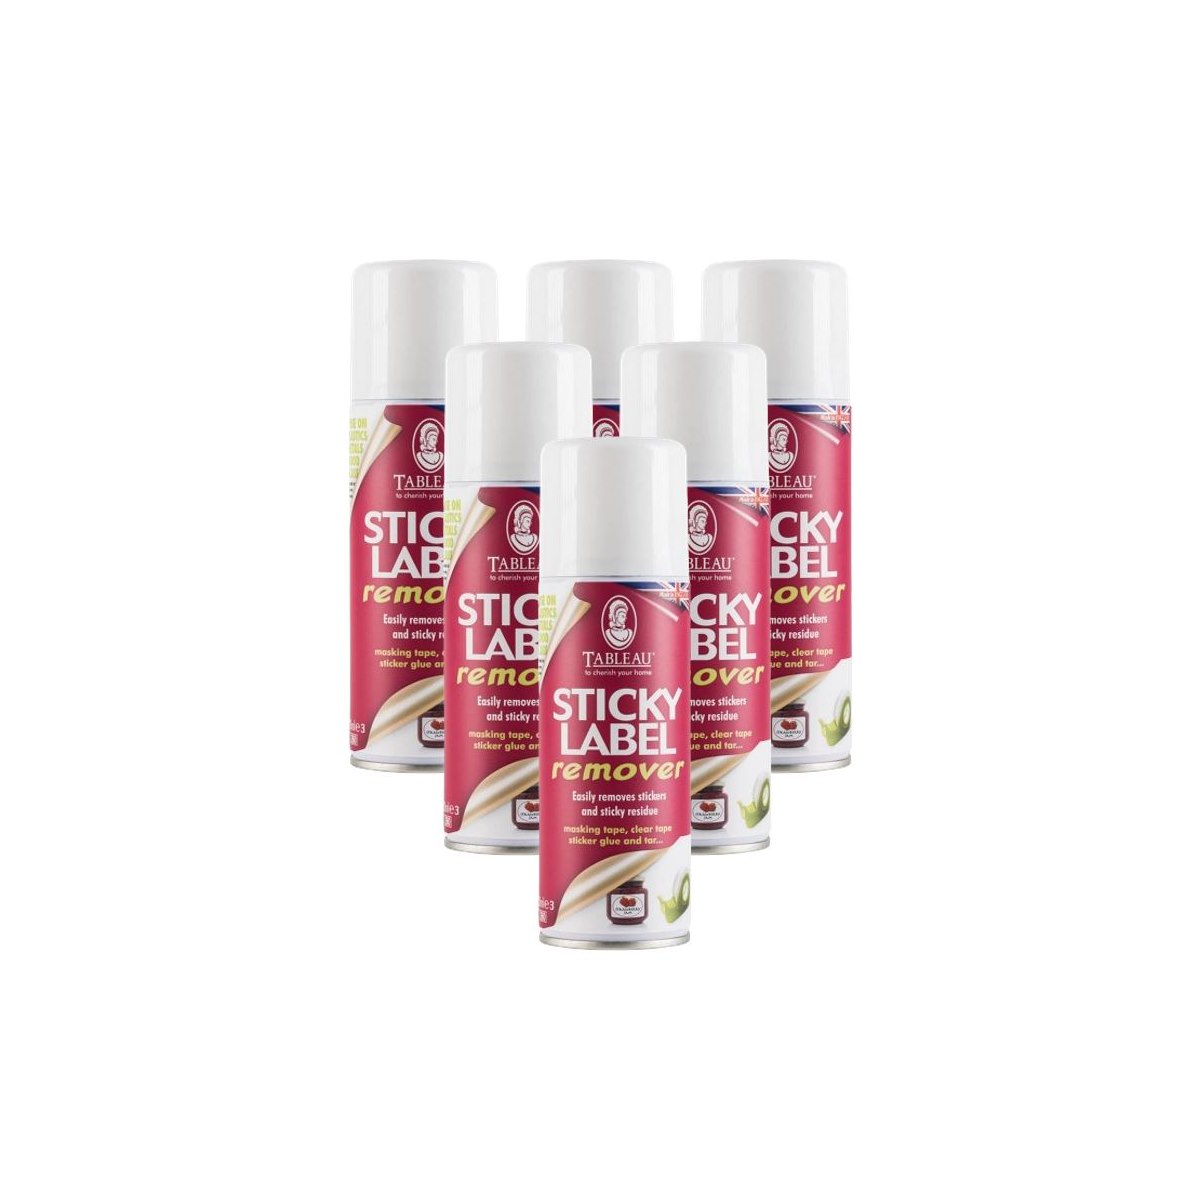 Case of 6 x Tableau Sticky Label Remover Spray 200ml